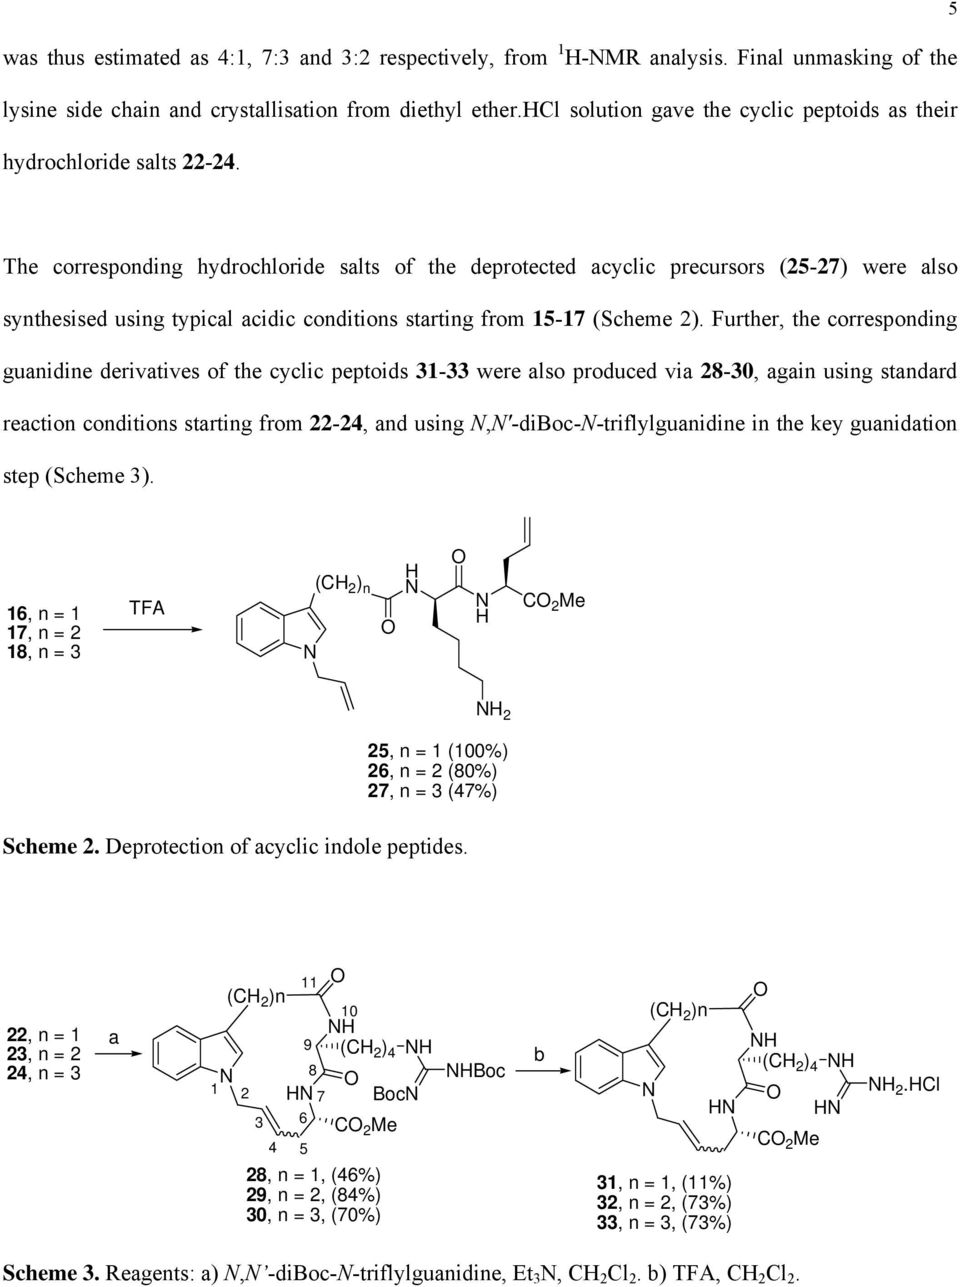 The corresponding hydrochloride salts of the deprotected acyclic precursors (25-27) were also synthesised using typical acidic conditions starting from 15-17 (Scheme 2).